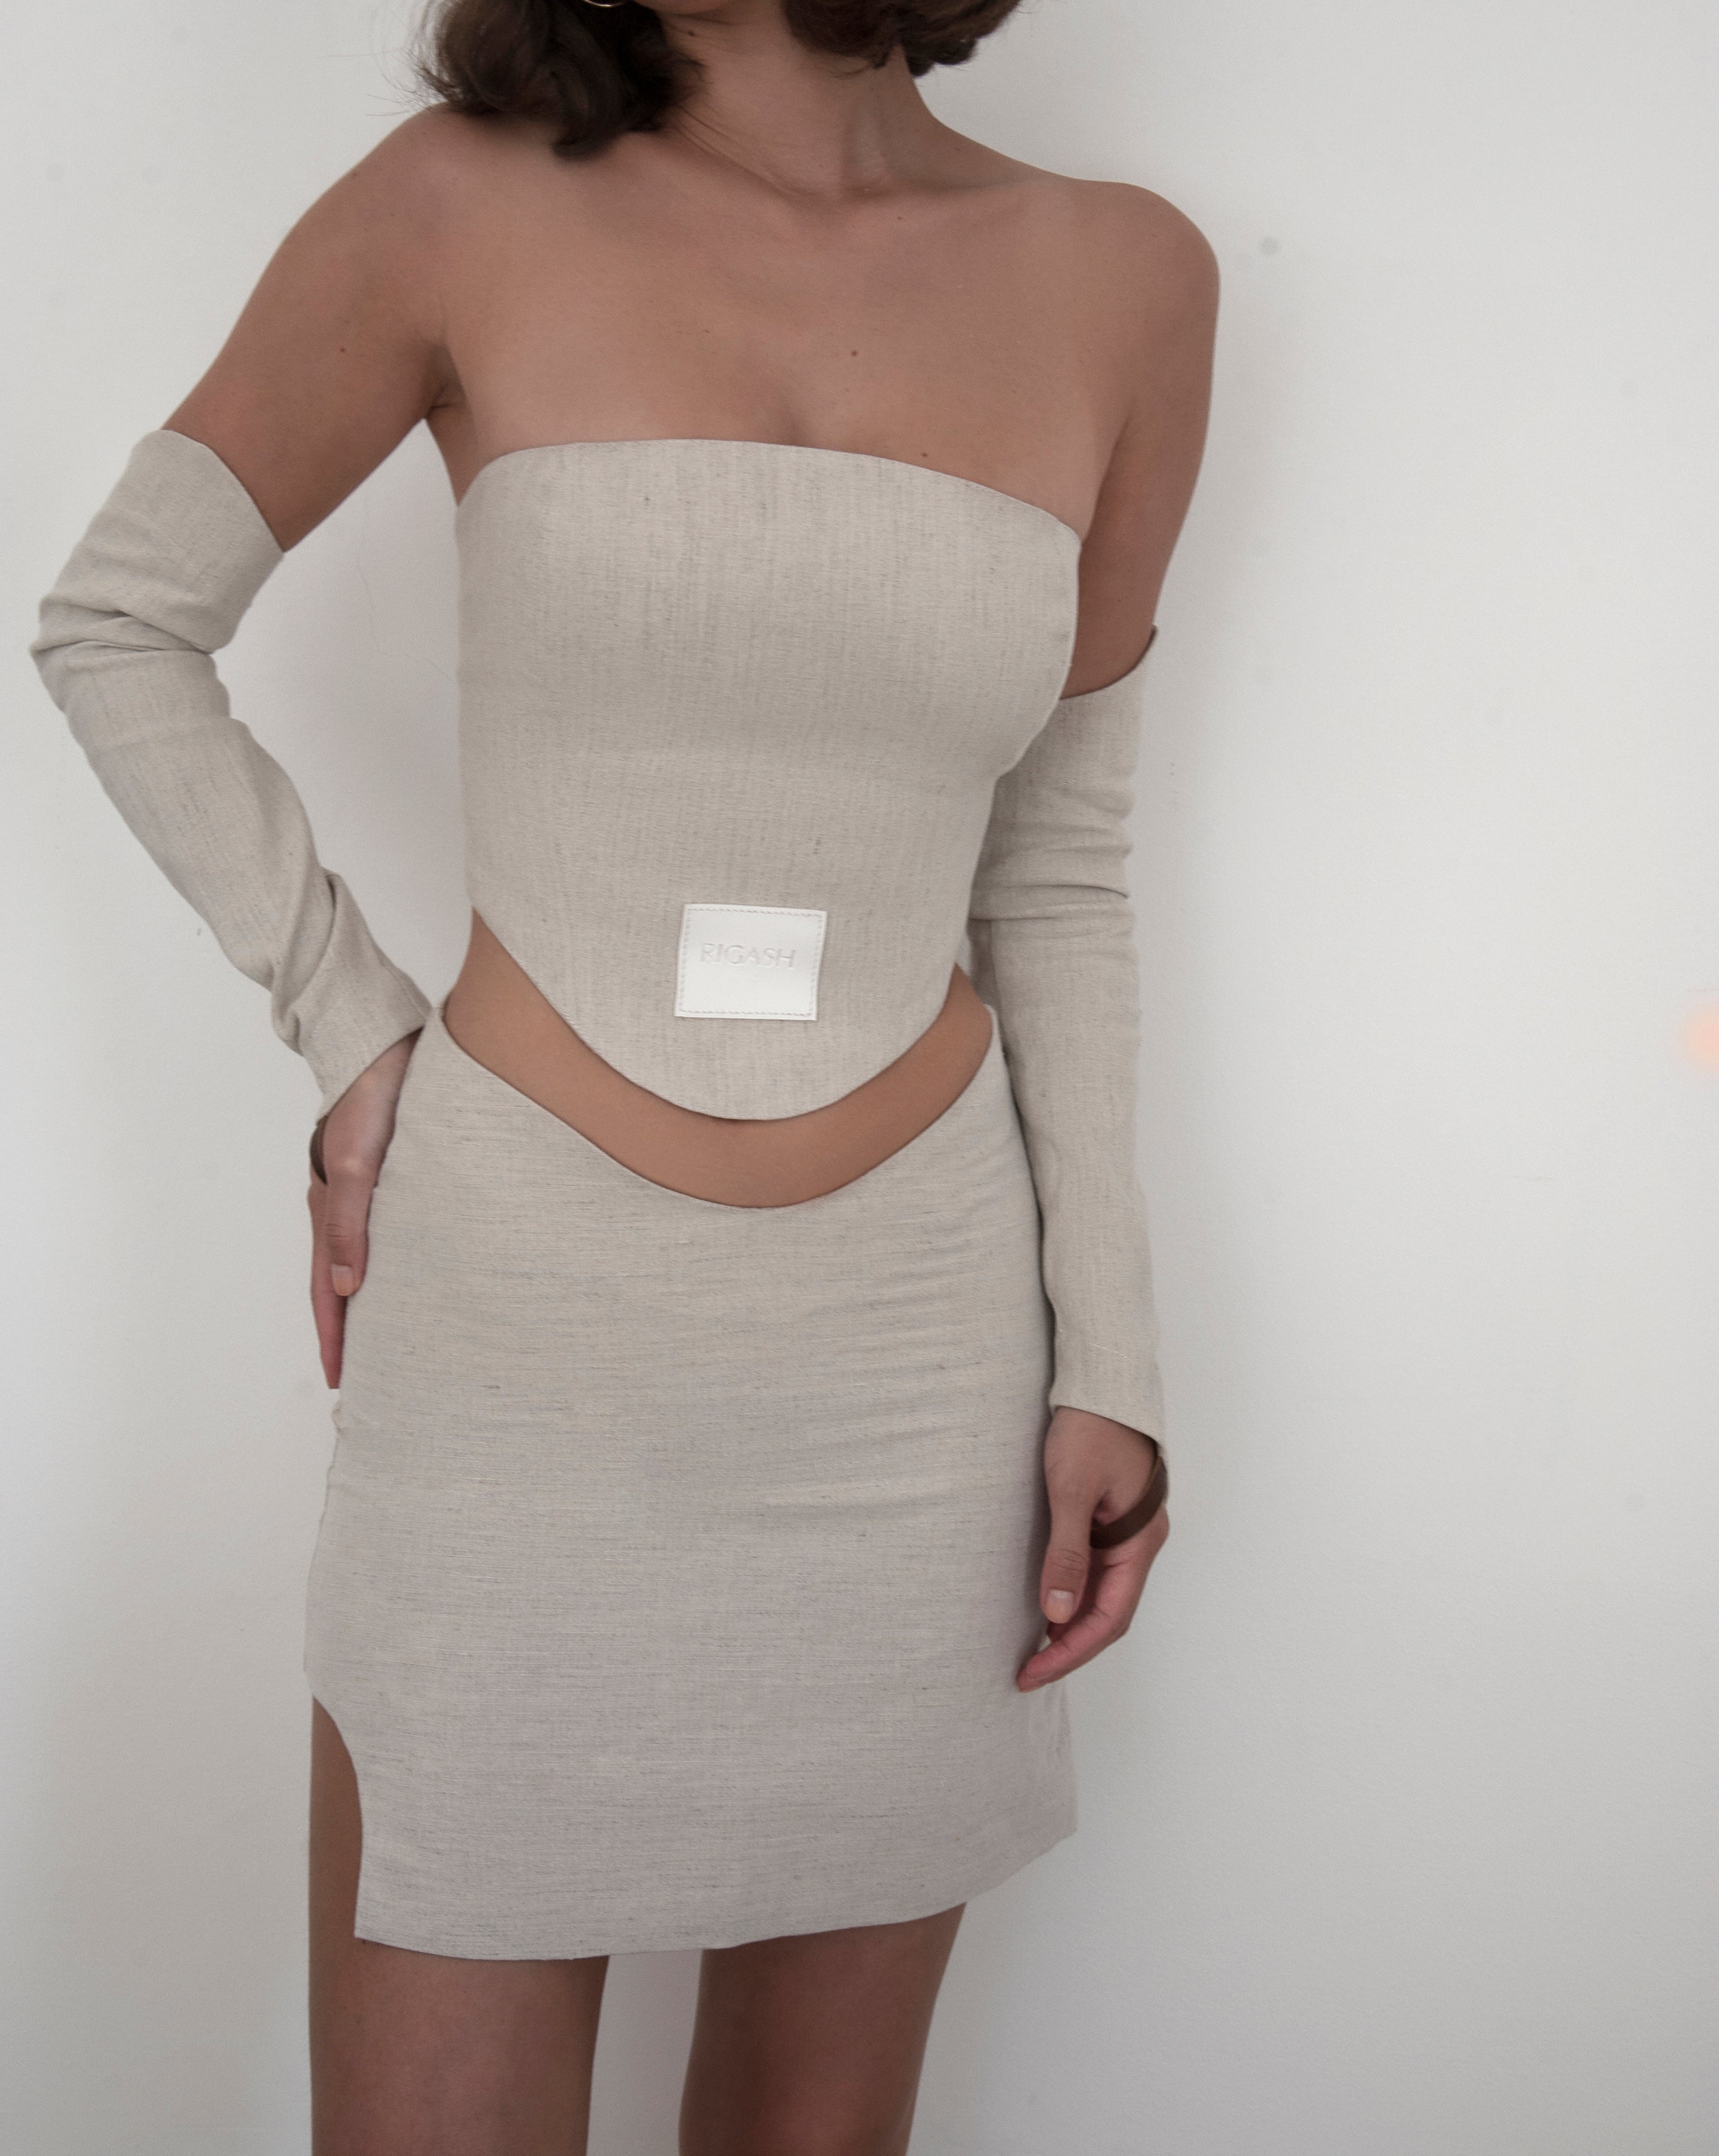 Dipped waist mini skirt  in Nude with side round slit.